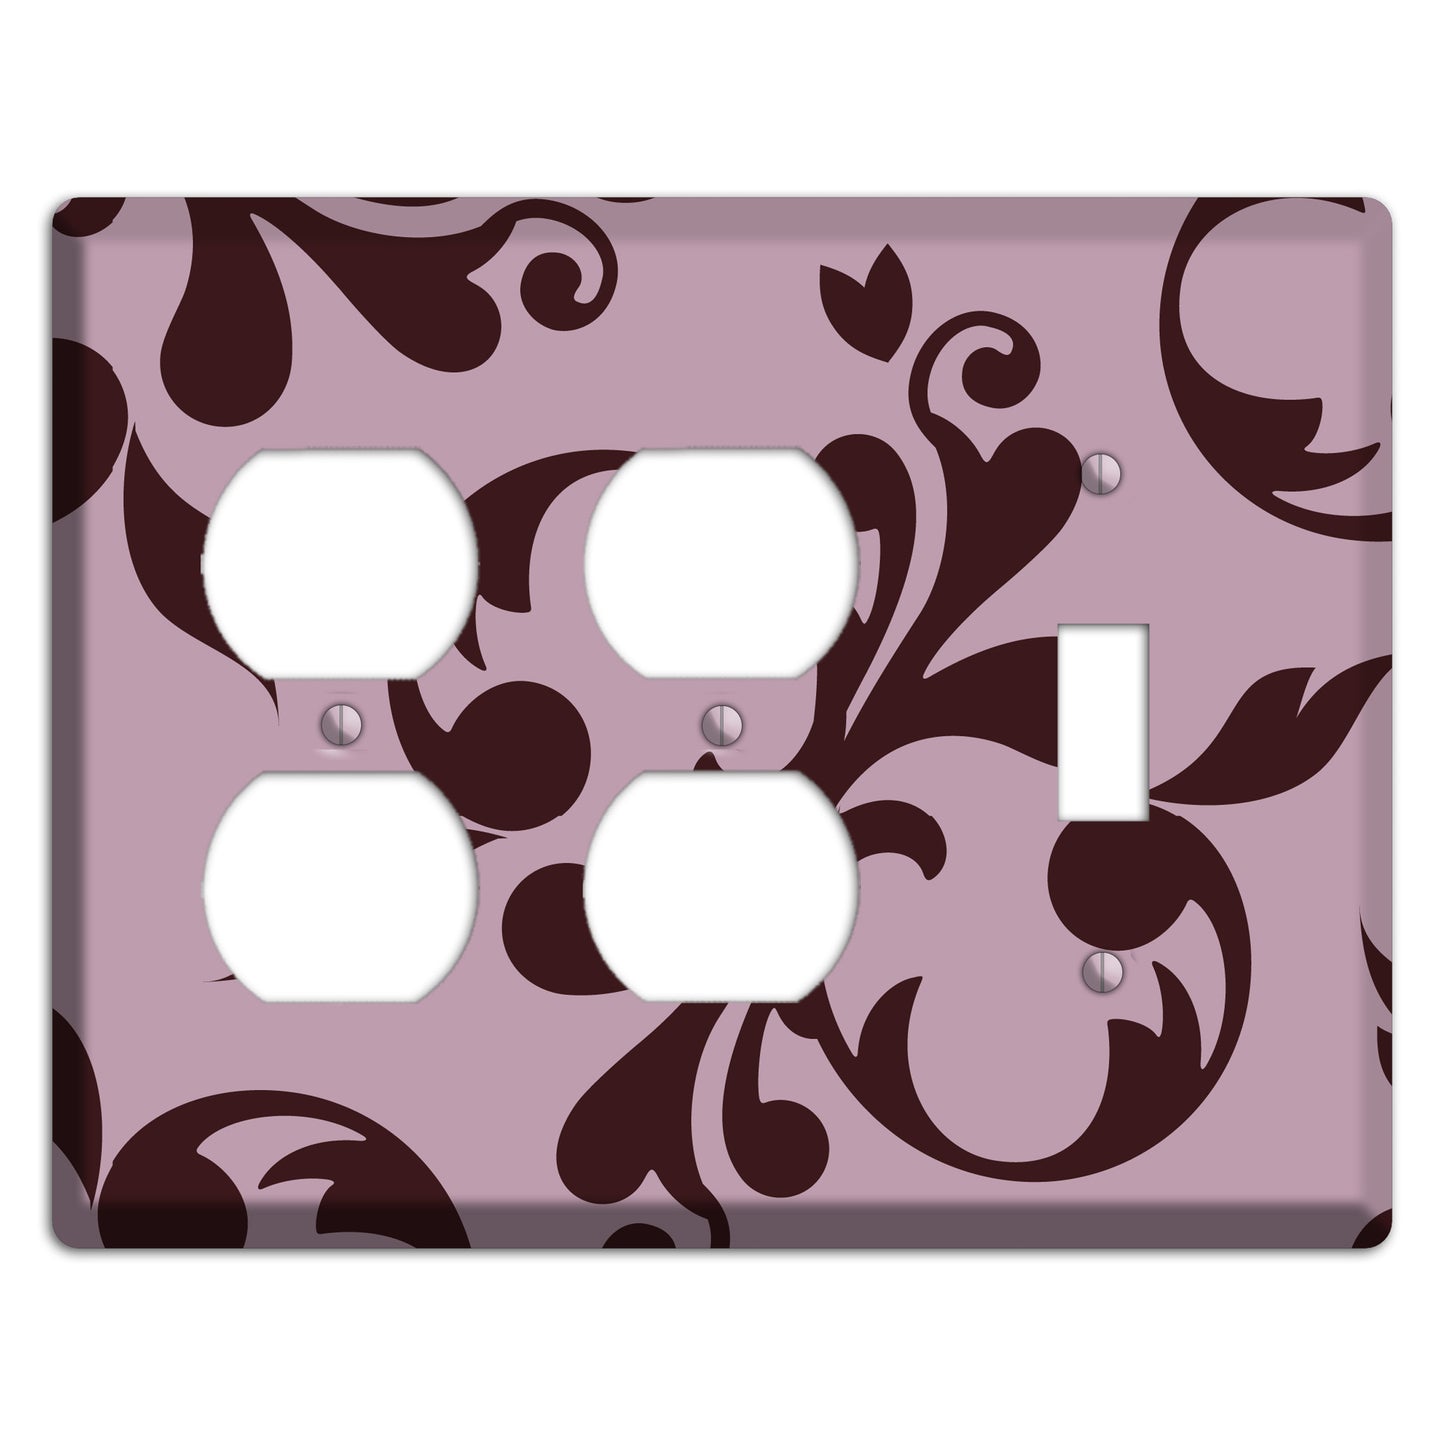 Dusty Rose and Burgundy Toile 2 Duplex / Toggle Wallplate